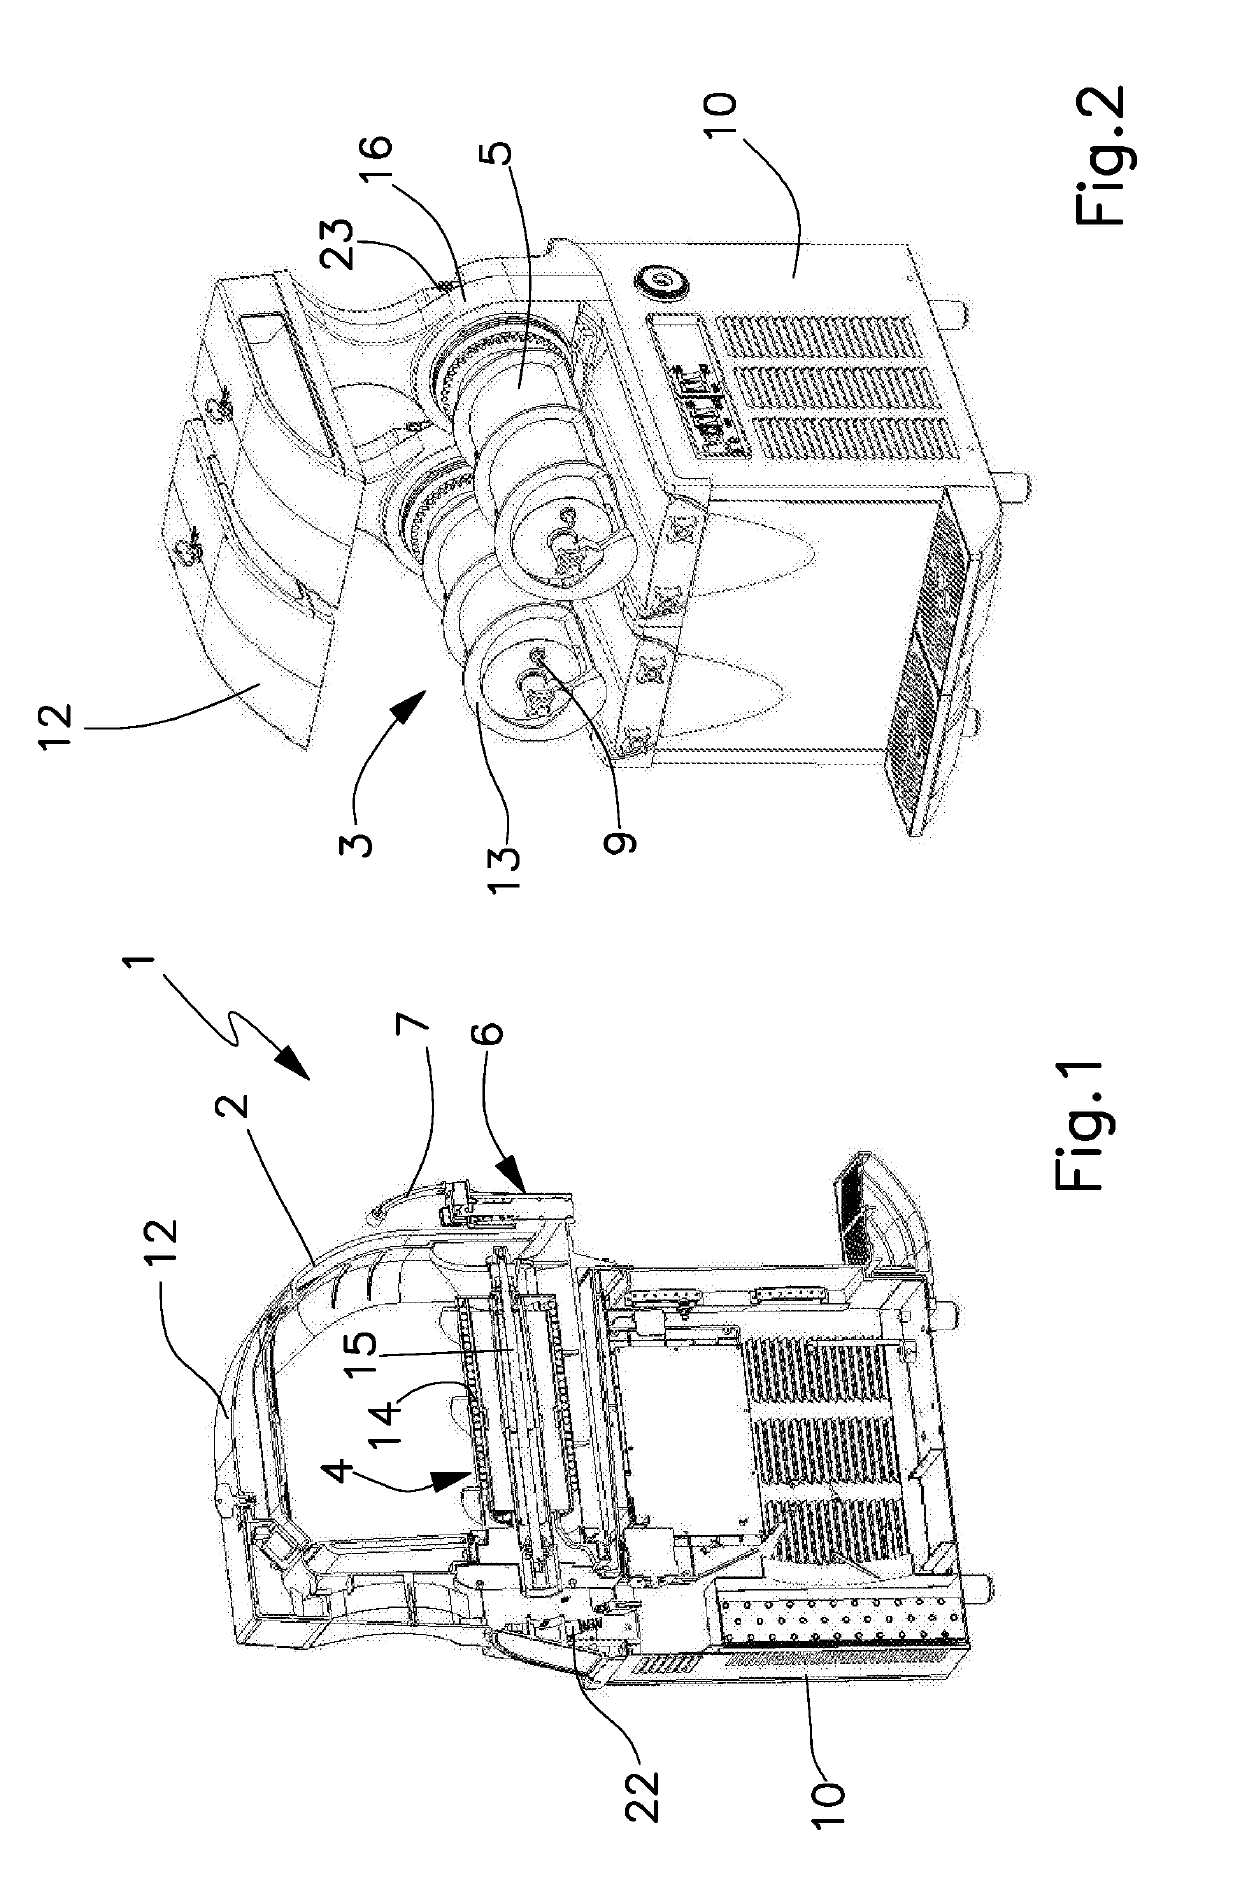 Apparatus for preparing and dispensing food products